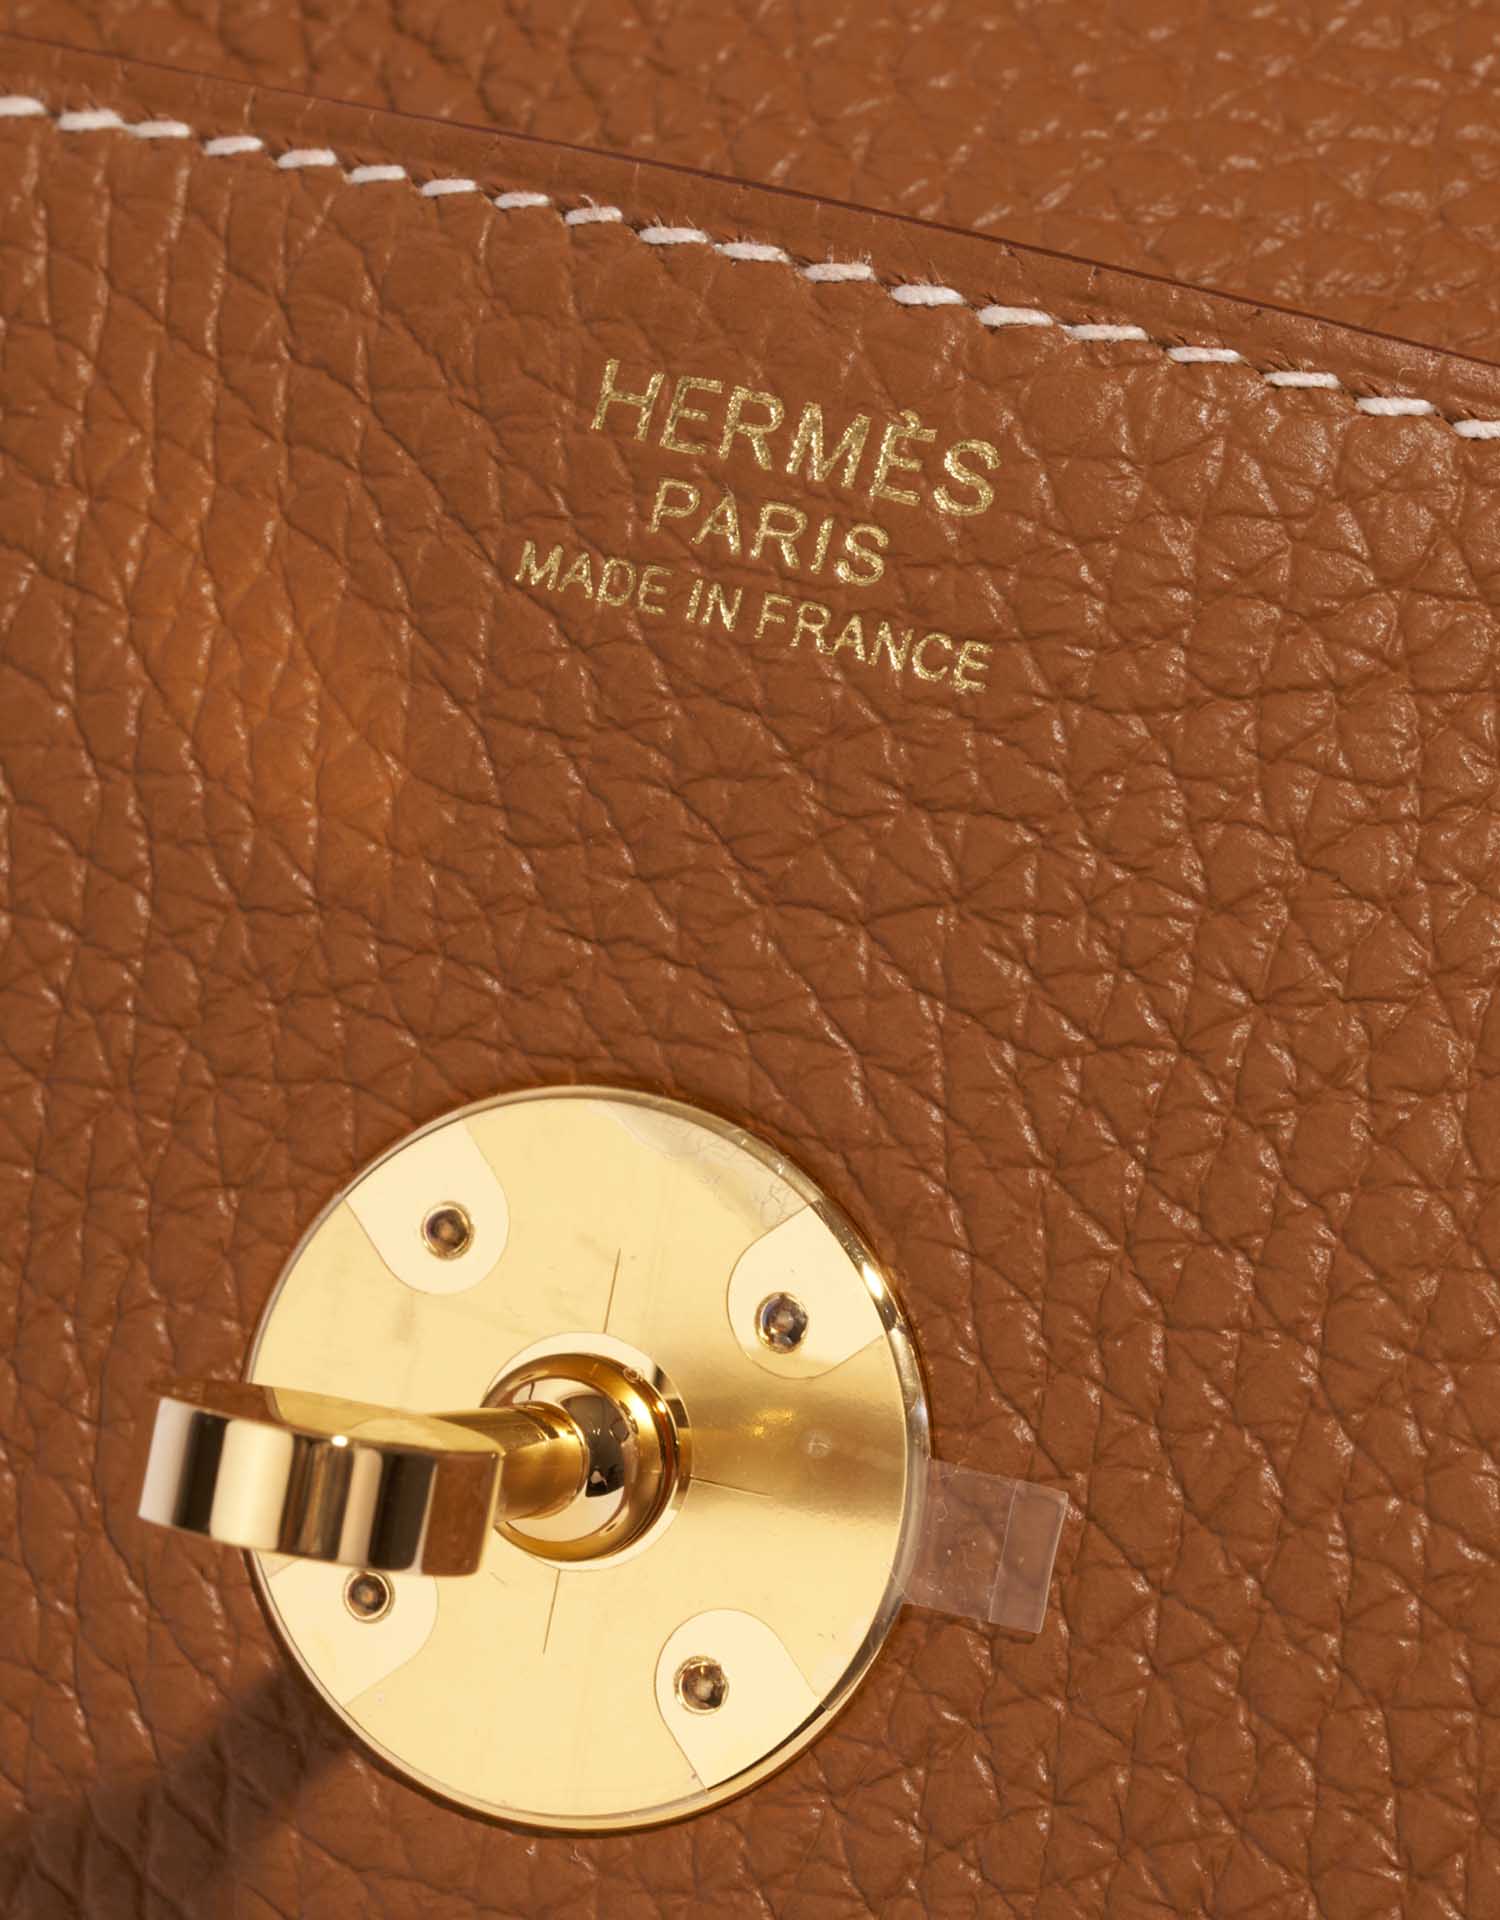 Hermes Lindy Mini Bag Togo Leather Gold Hardware In Brown